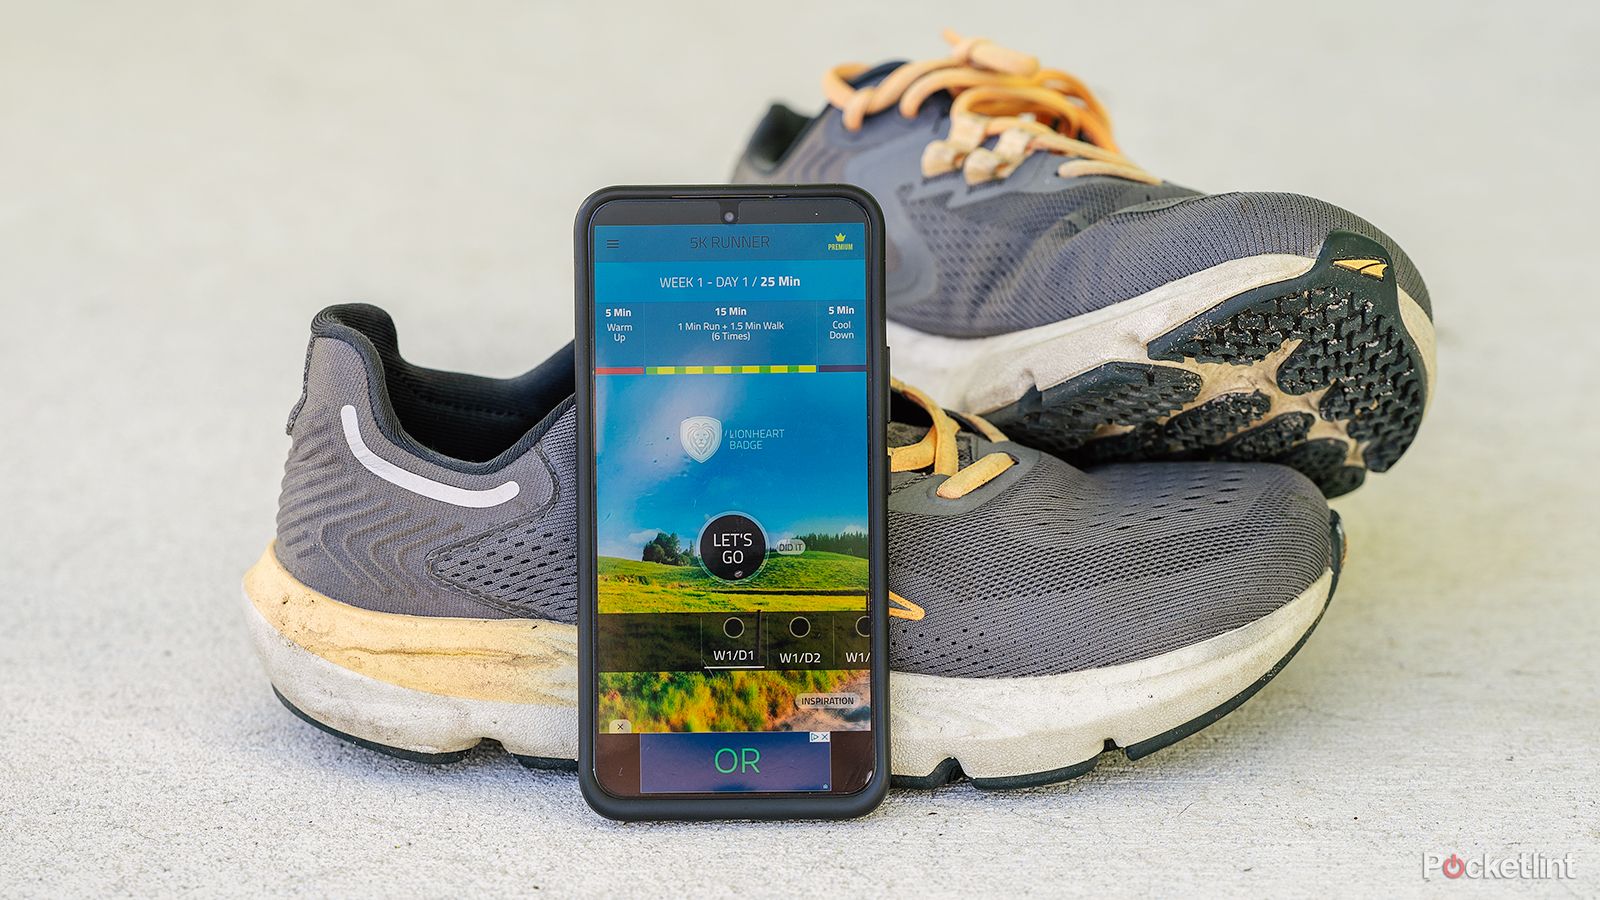 A phone displays the 5K Runner app while leaning against running shoes. 